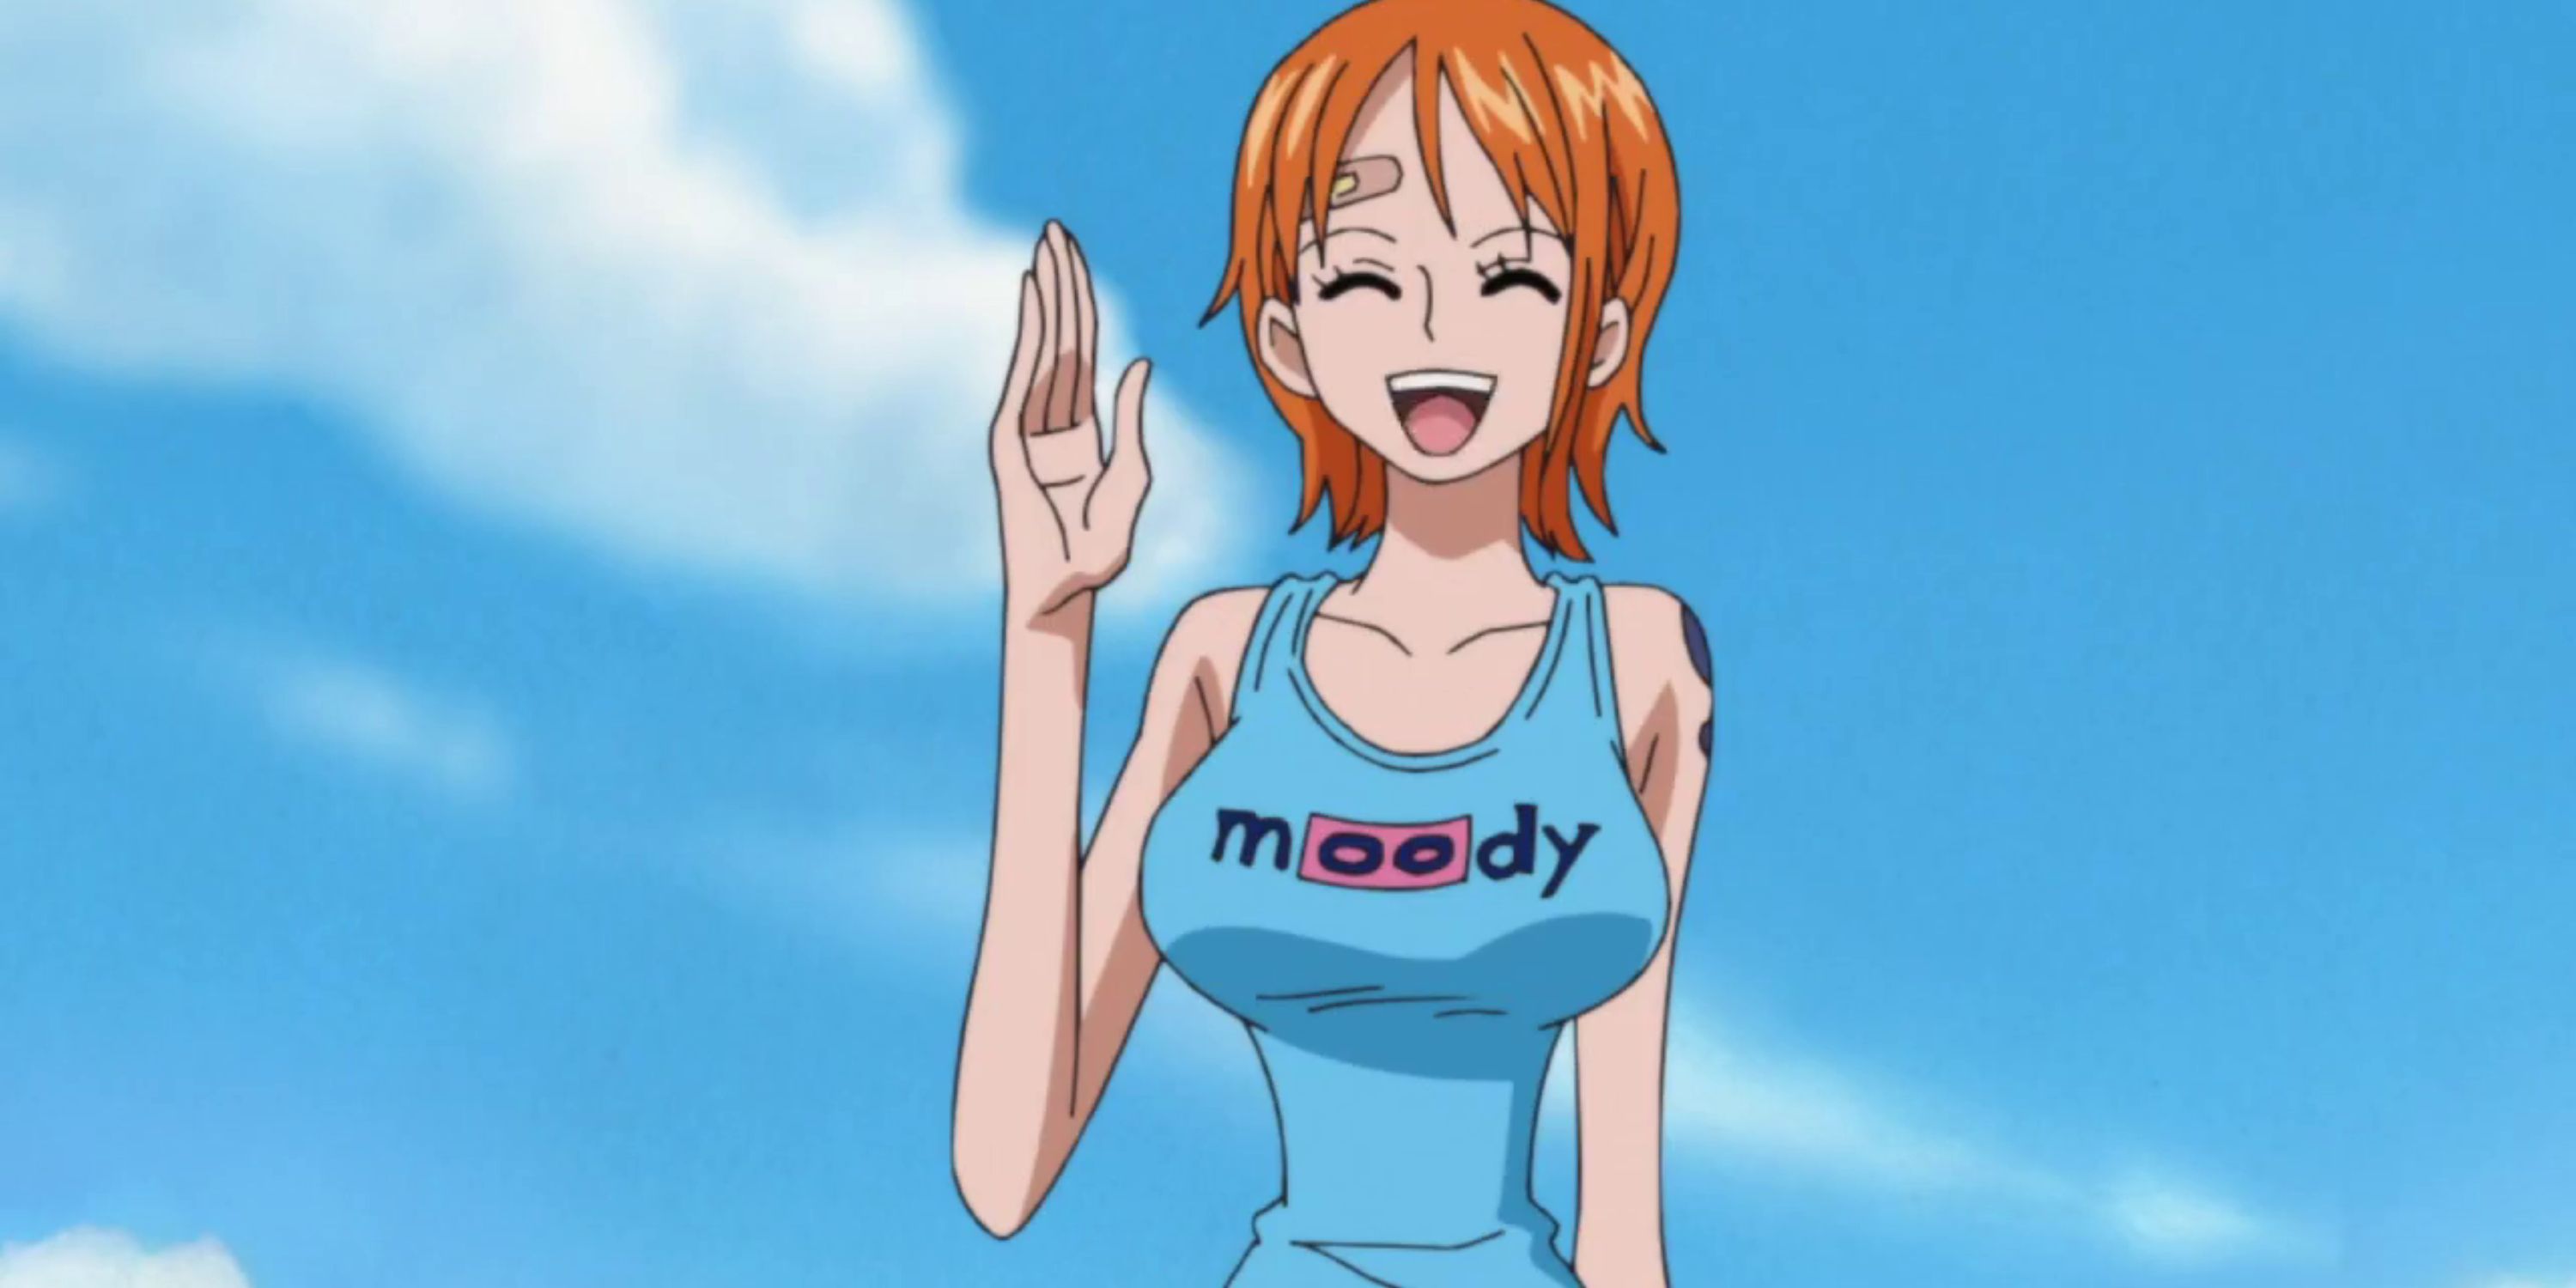 Nami in "moody" shirt during One Piece's Post-War arc.